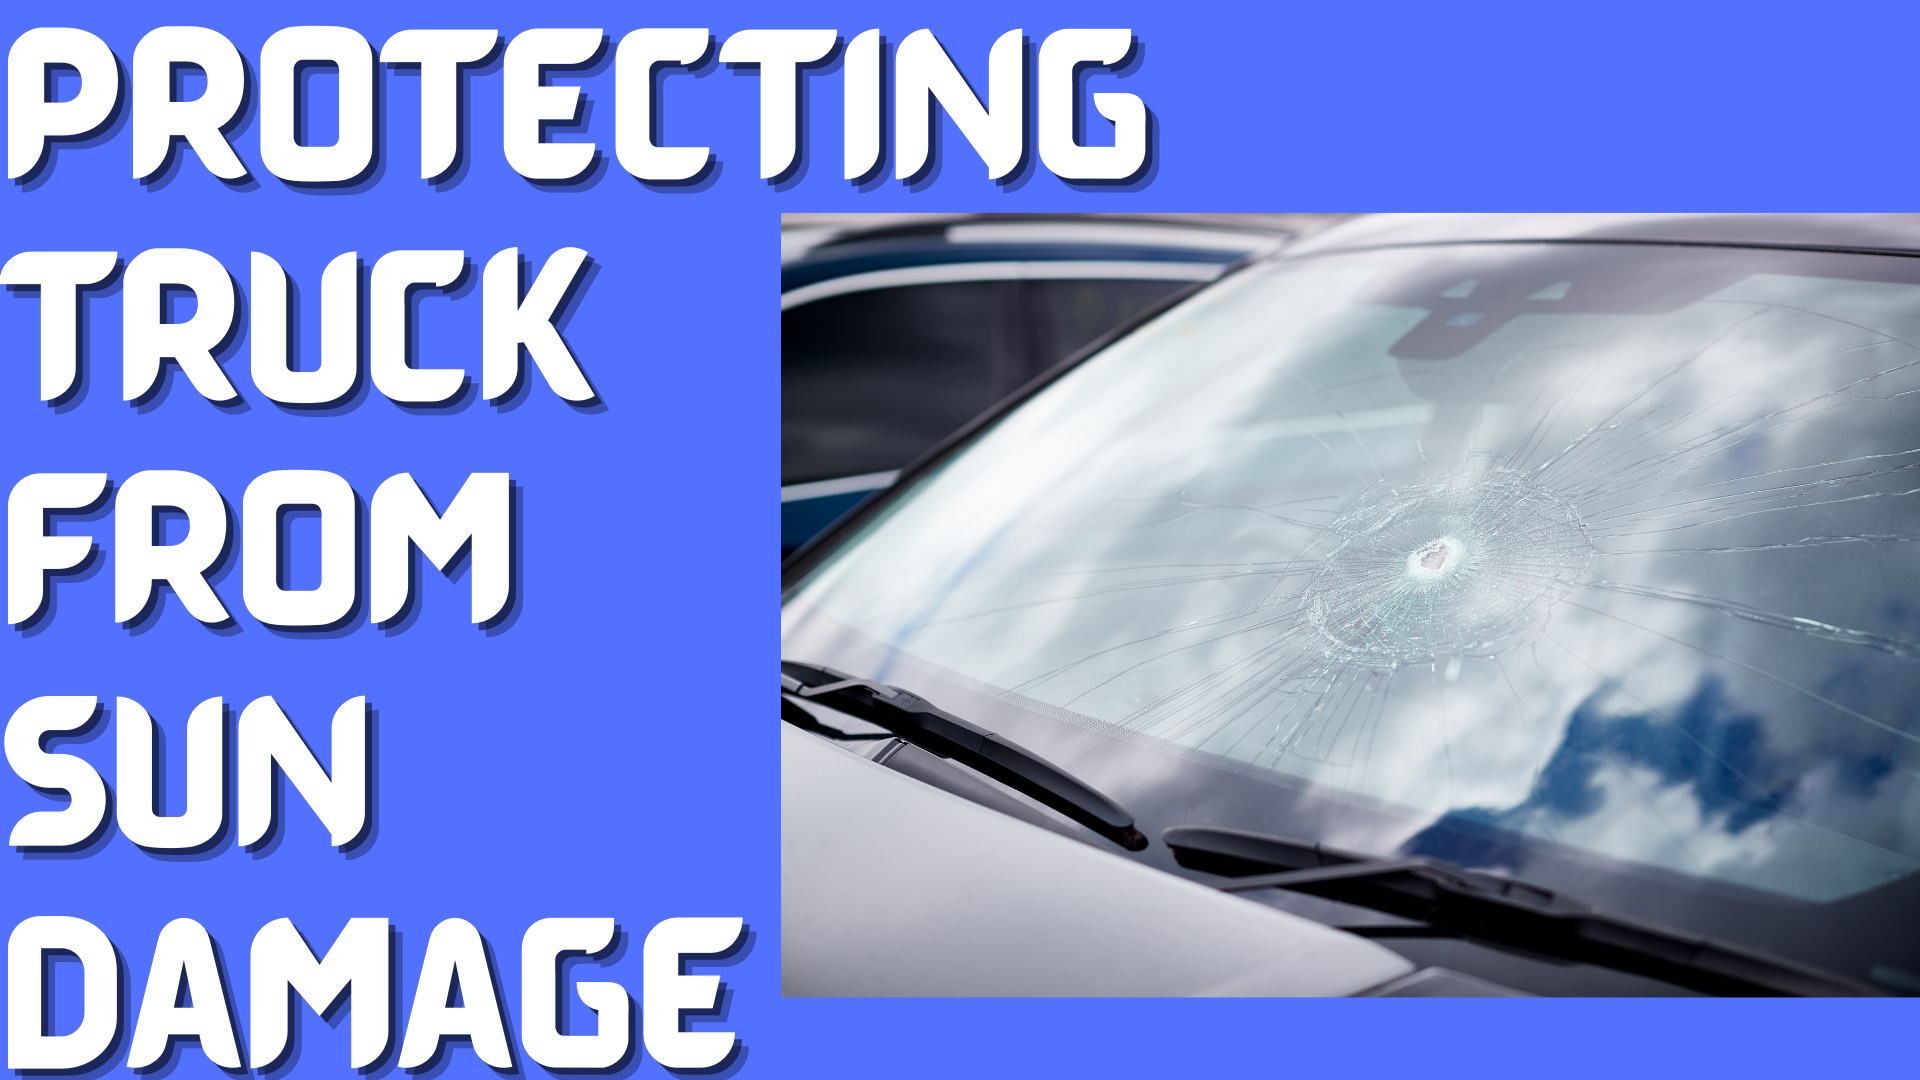 How Do You Protect Your Truck From Sun Damage Effectively?